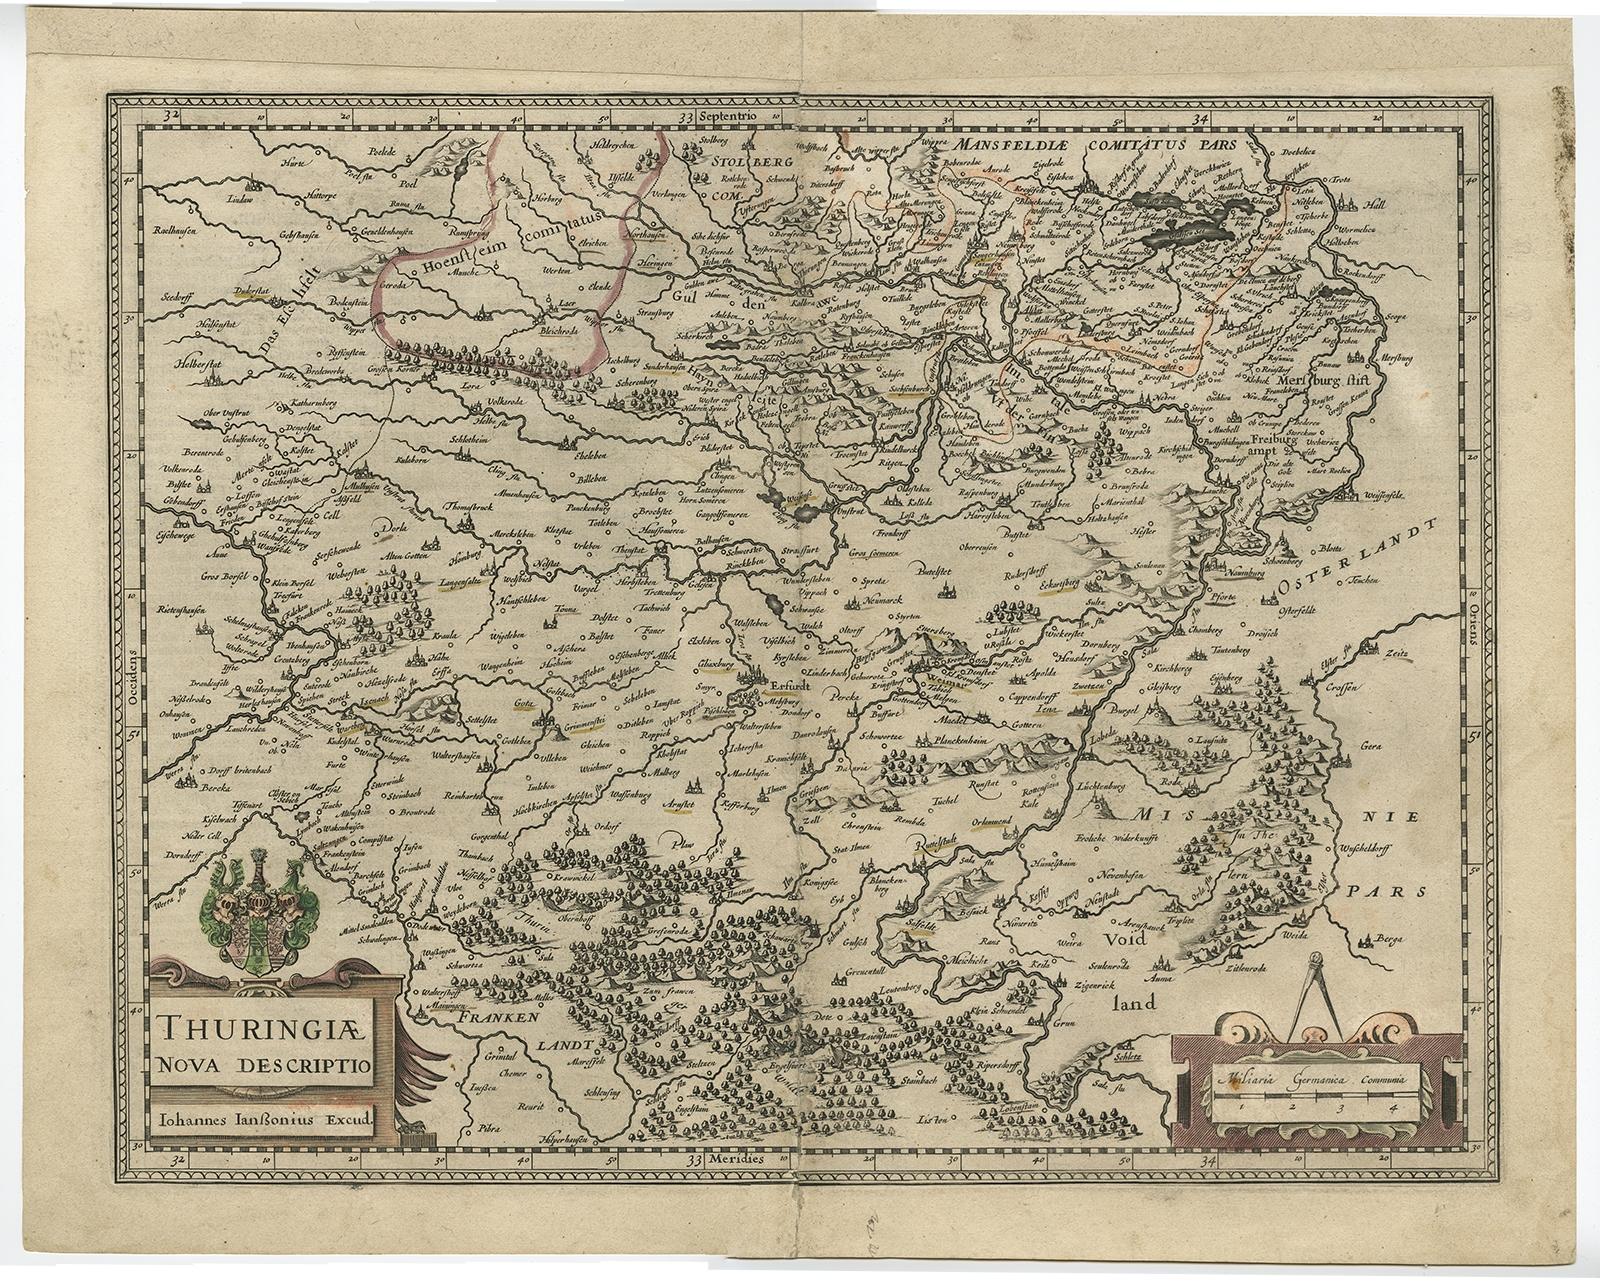 Antique map titled 'Thuringiae Nova Descriptio.' Detailed map of Thuringia, Germany by J. Janssonius. With one cartouche, coat-of-arms and a mileage scale. With Erfurt in the centre. German text on verso. Source unknown, to be determined.

Artists